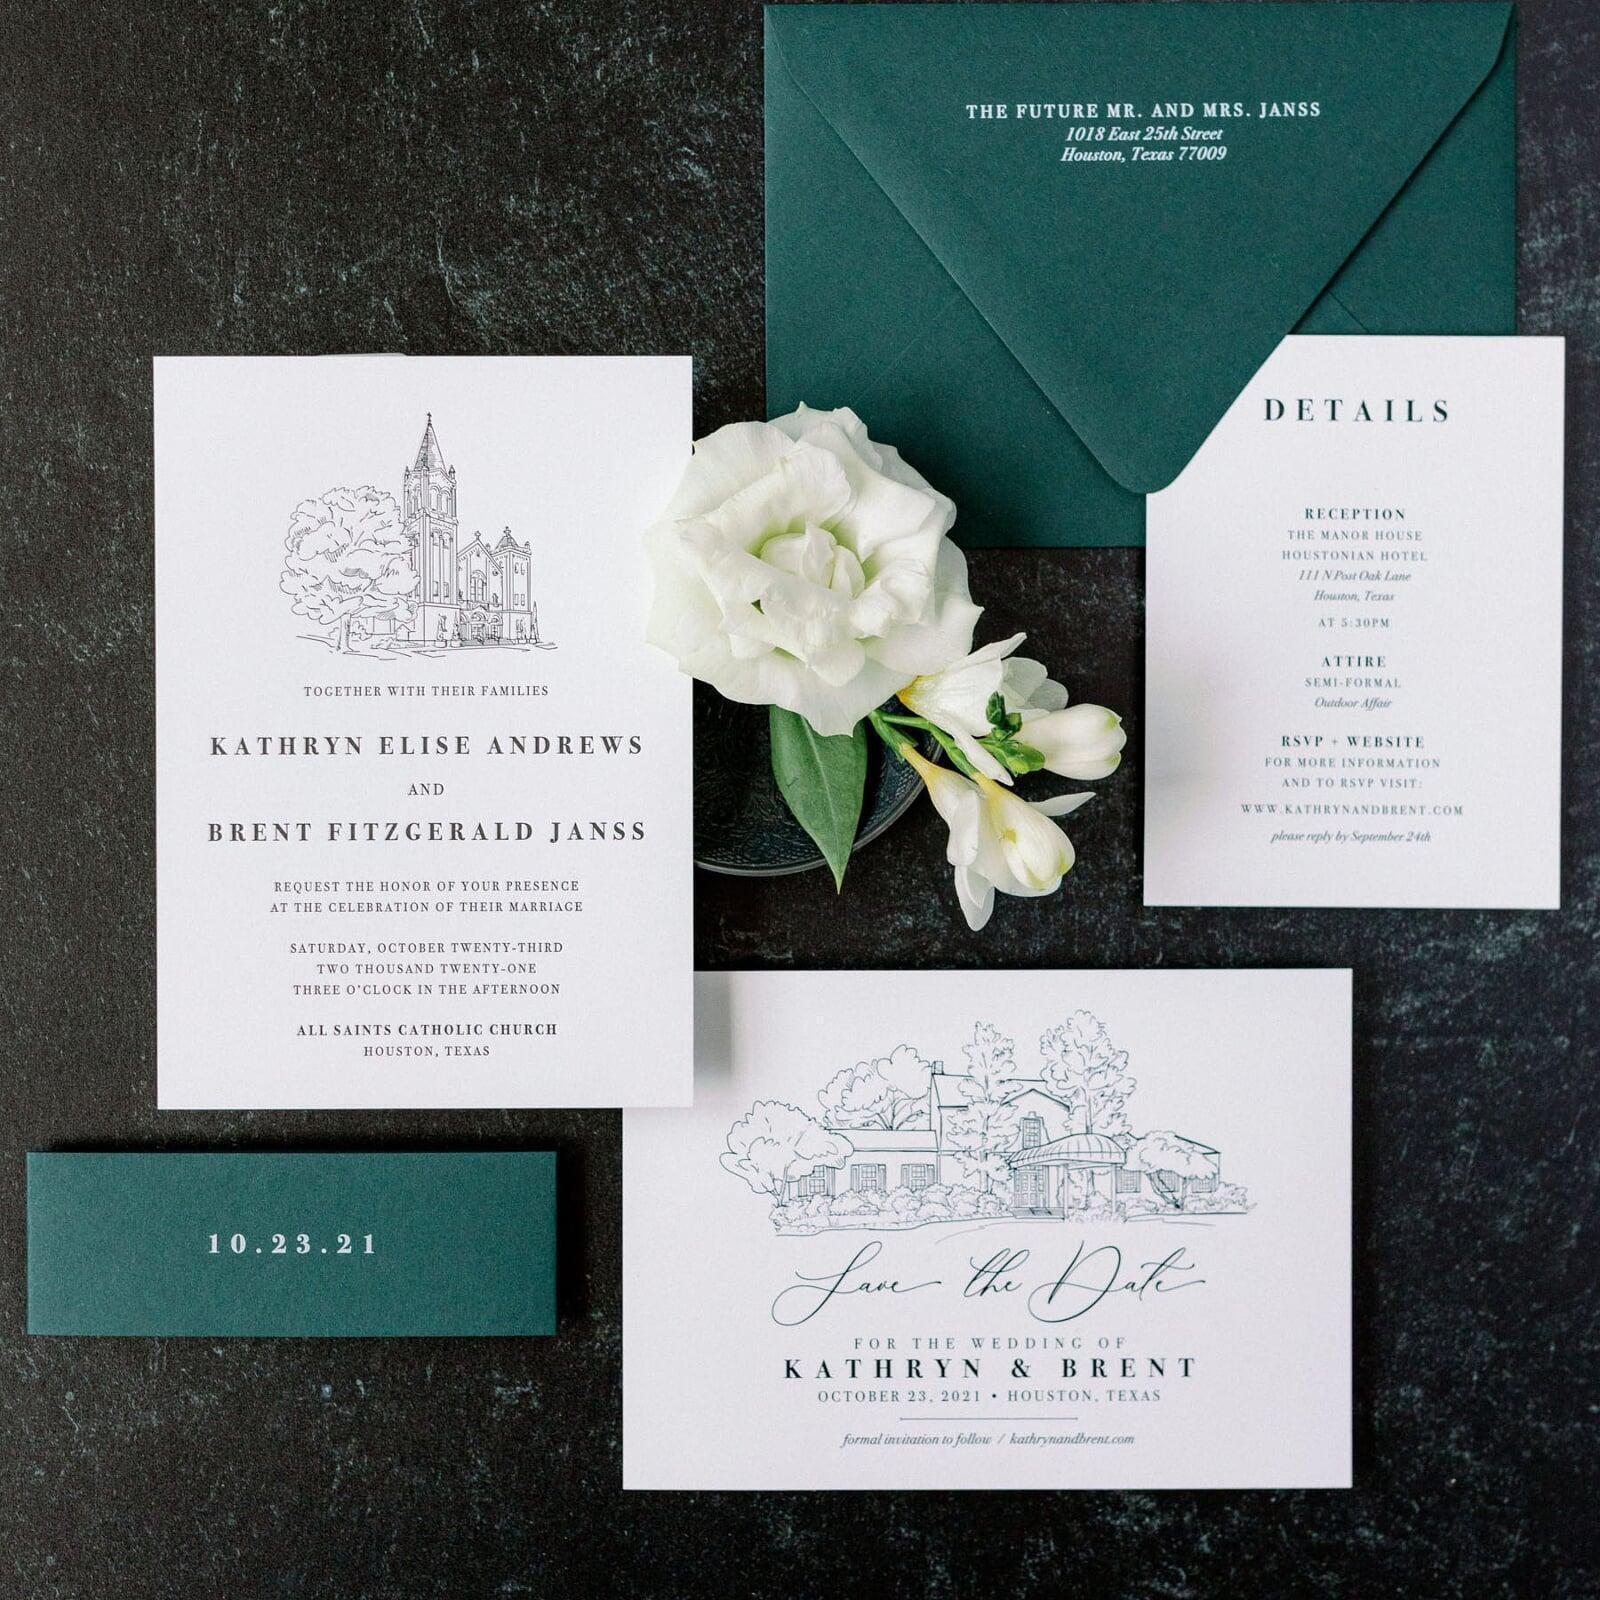 Allie's Gold Thermography Monogrammed Wedding Invitation with Emerald Green Velvet Band